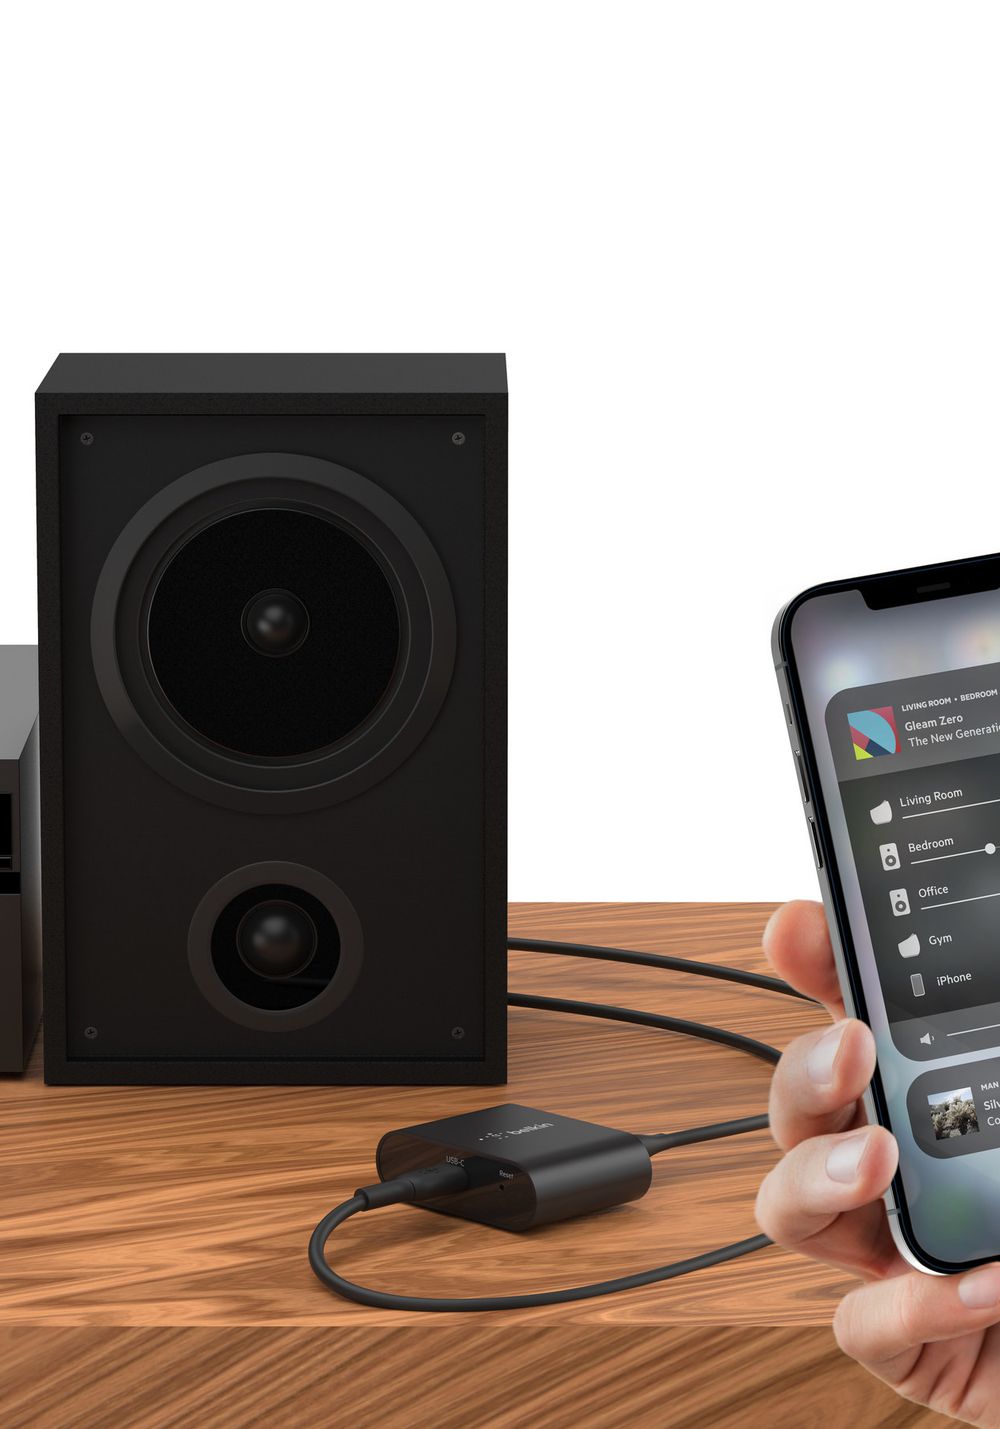 Belkin's $99 SoundForm Connect Audio lets you add AirPlay 2 to 